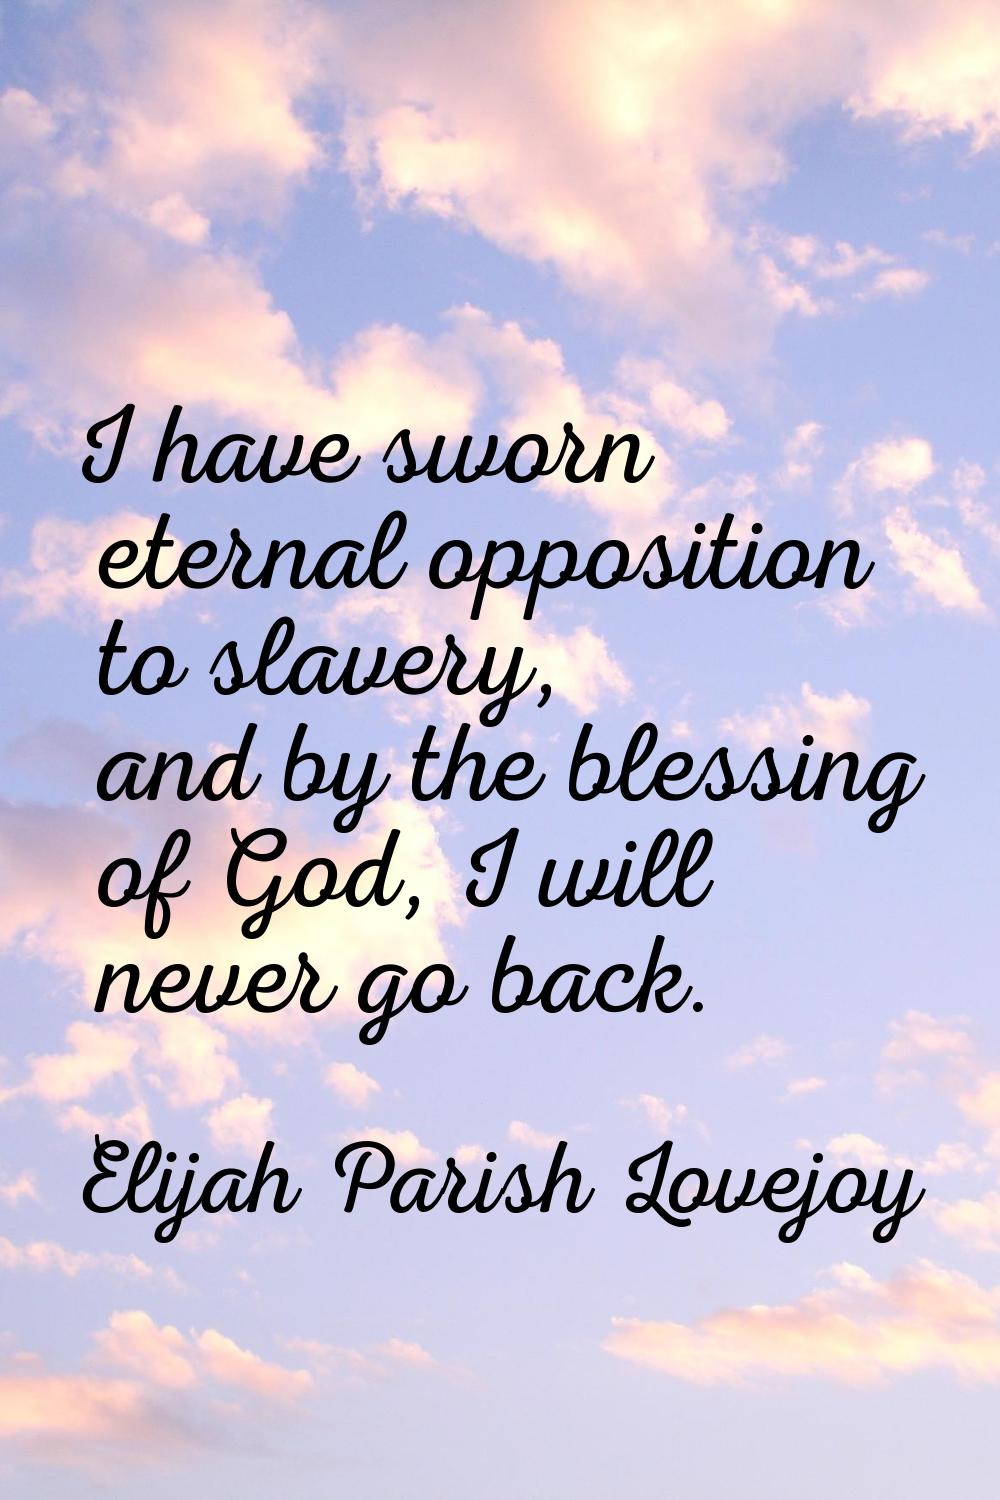 I have sworn eternal opposition to slavery, and by the blessing of God, I will never go back.